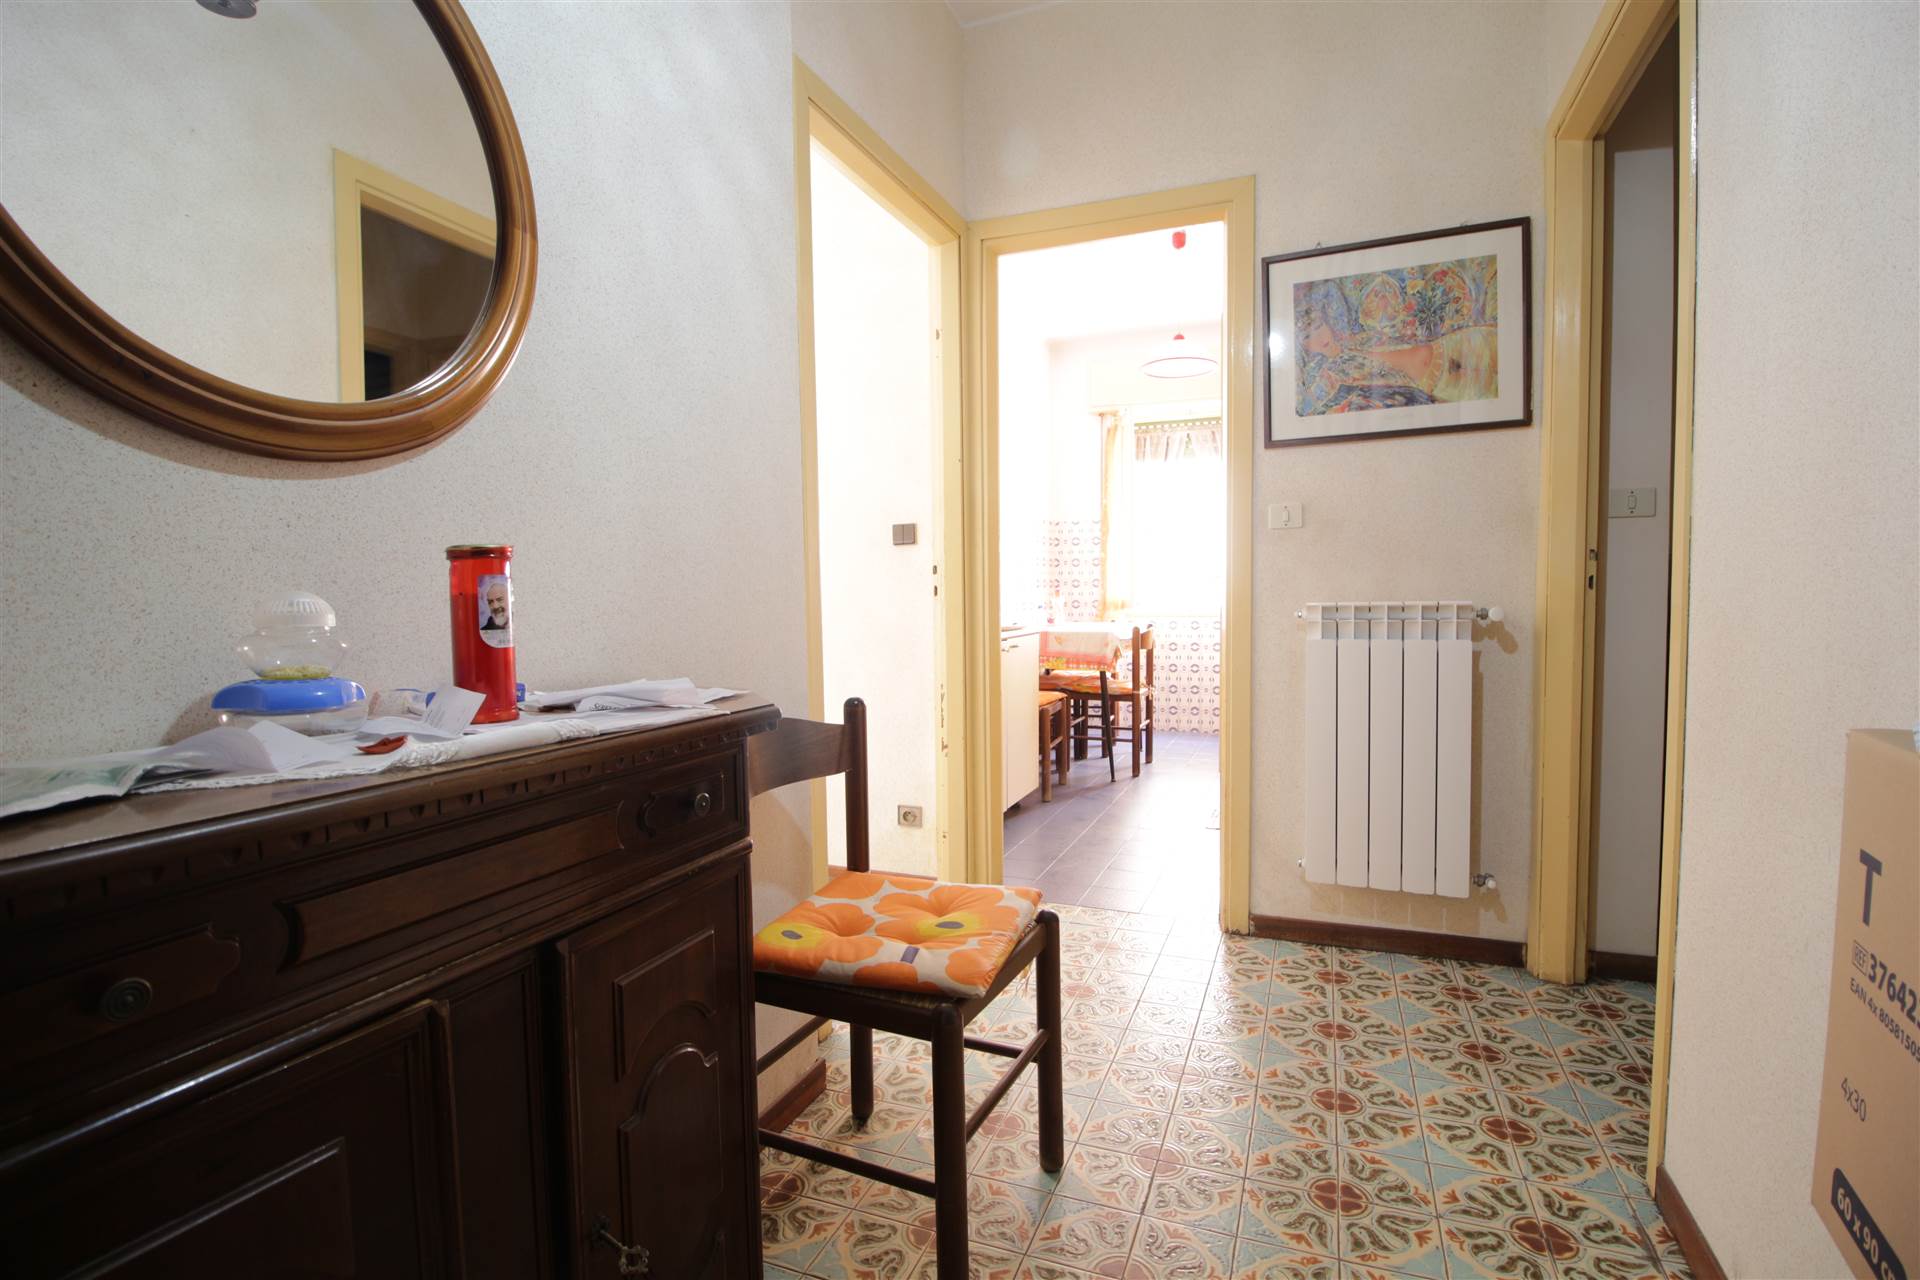 CENTRO, VENTIMIGLIA, Apartment for sale of 75 Sq. mt., Habitable, Heating Individual heating system, placed at 2°, composed by: 4 Rooms, Separate 